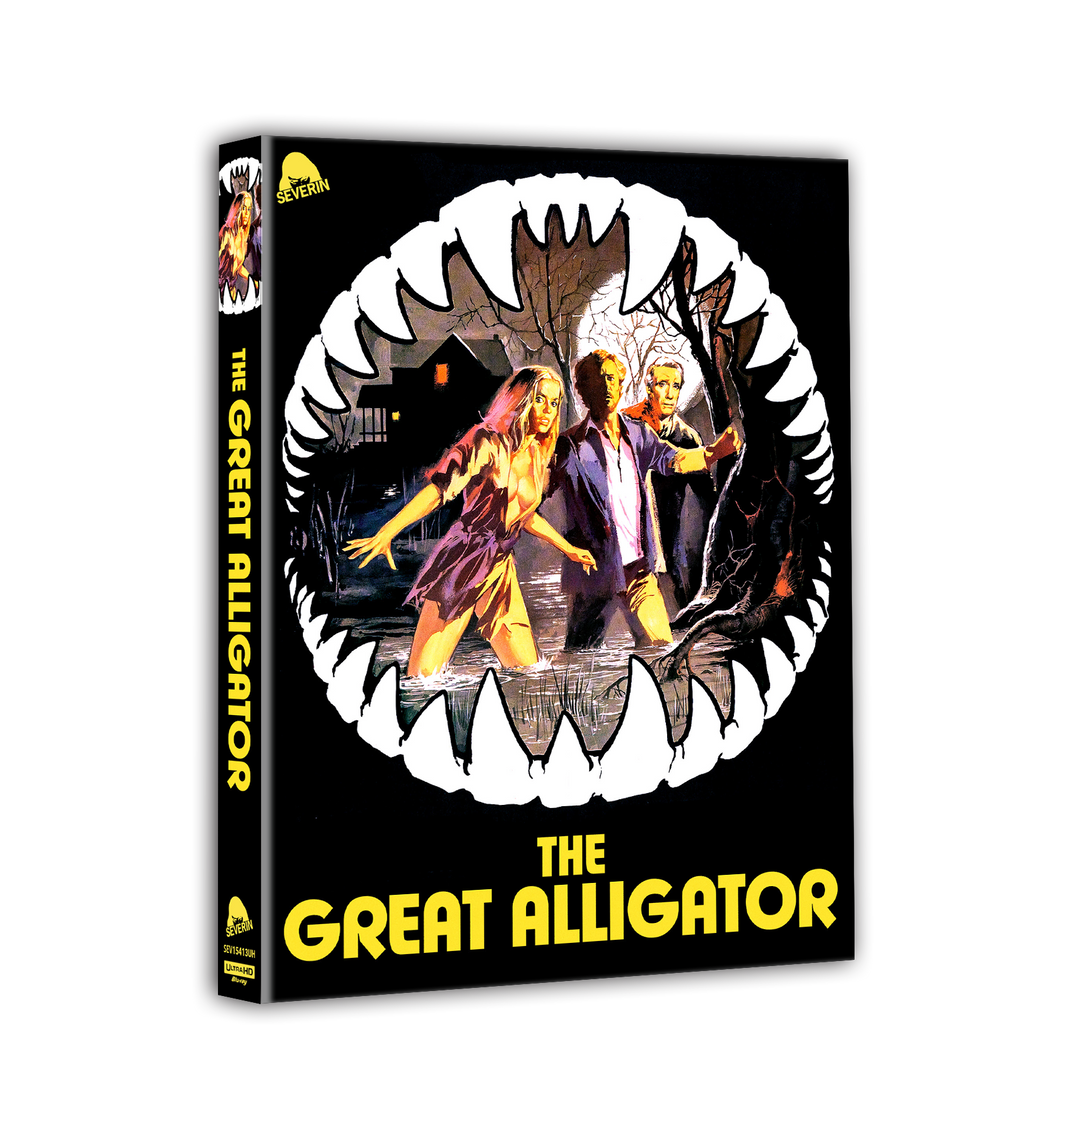 The Great Alligator [2-Disc 4K UHD w/Exclusive Slipcover]